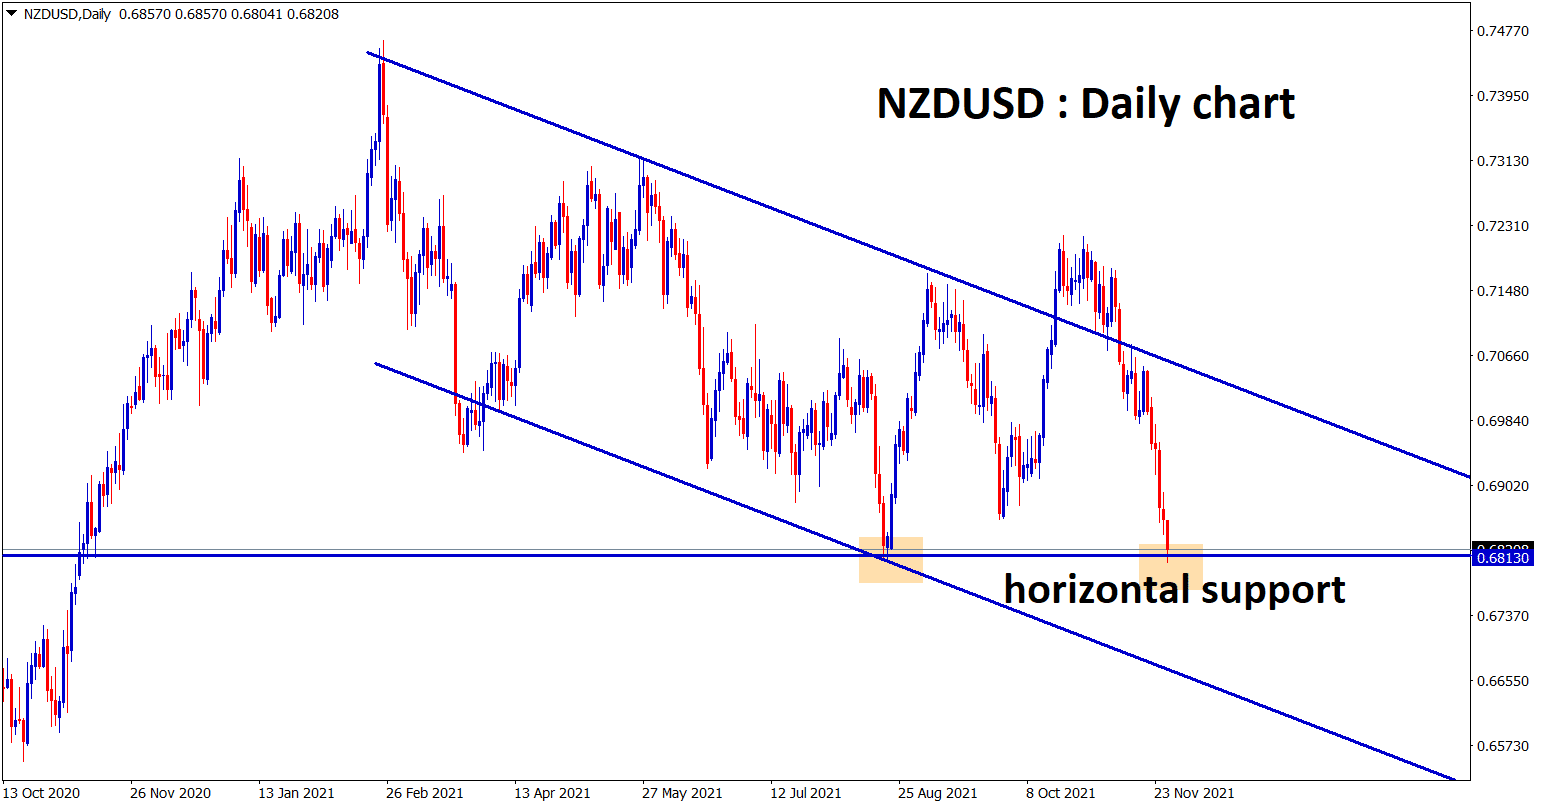 NZDUSD is standing at the horizontal support zone in the daily timeframe chart 1